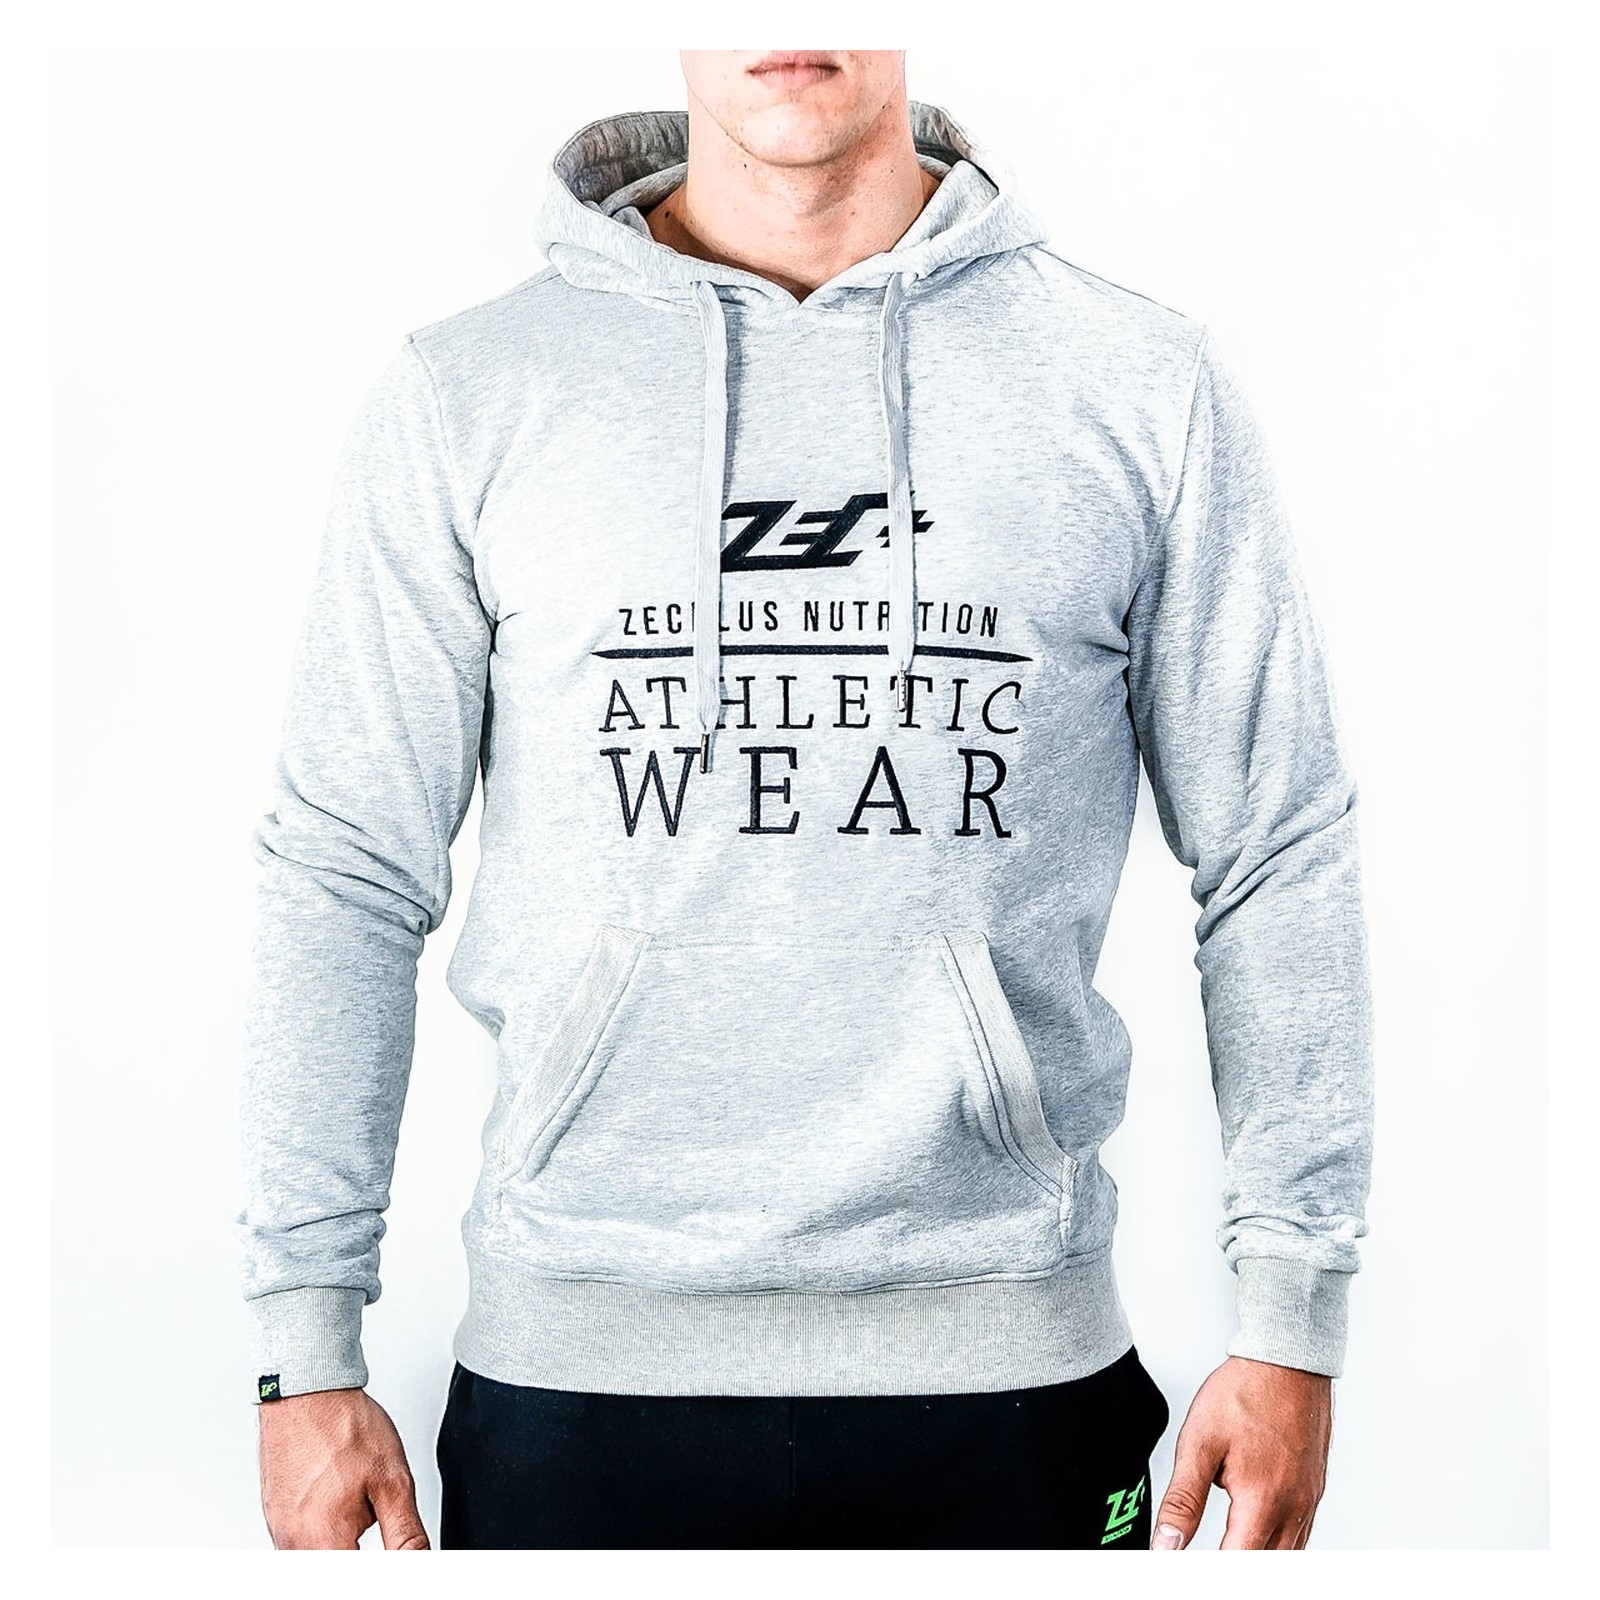 Zec Plus Nutrition hoodie - Europe's No. 1 for home fitness